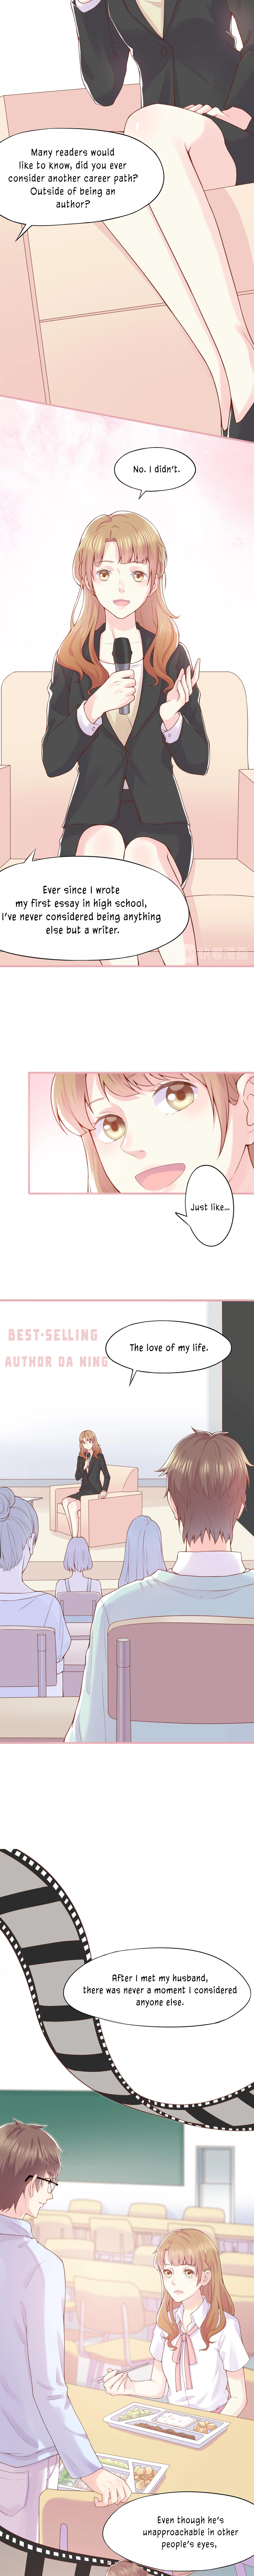 Being With You Means the World to Me Chapter 1 - Page 6